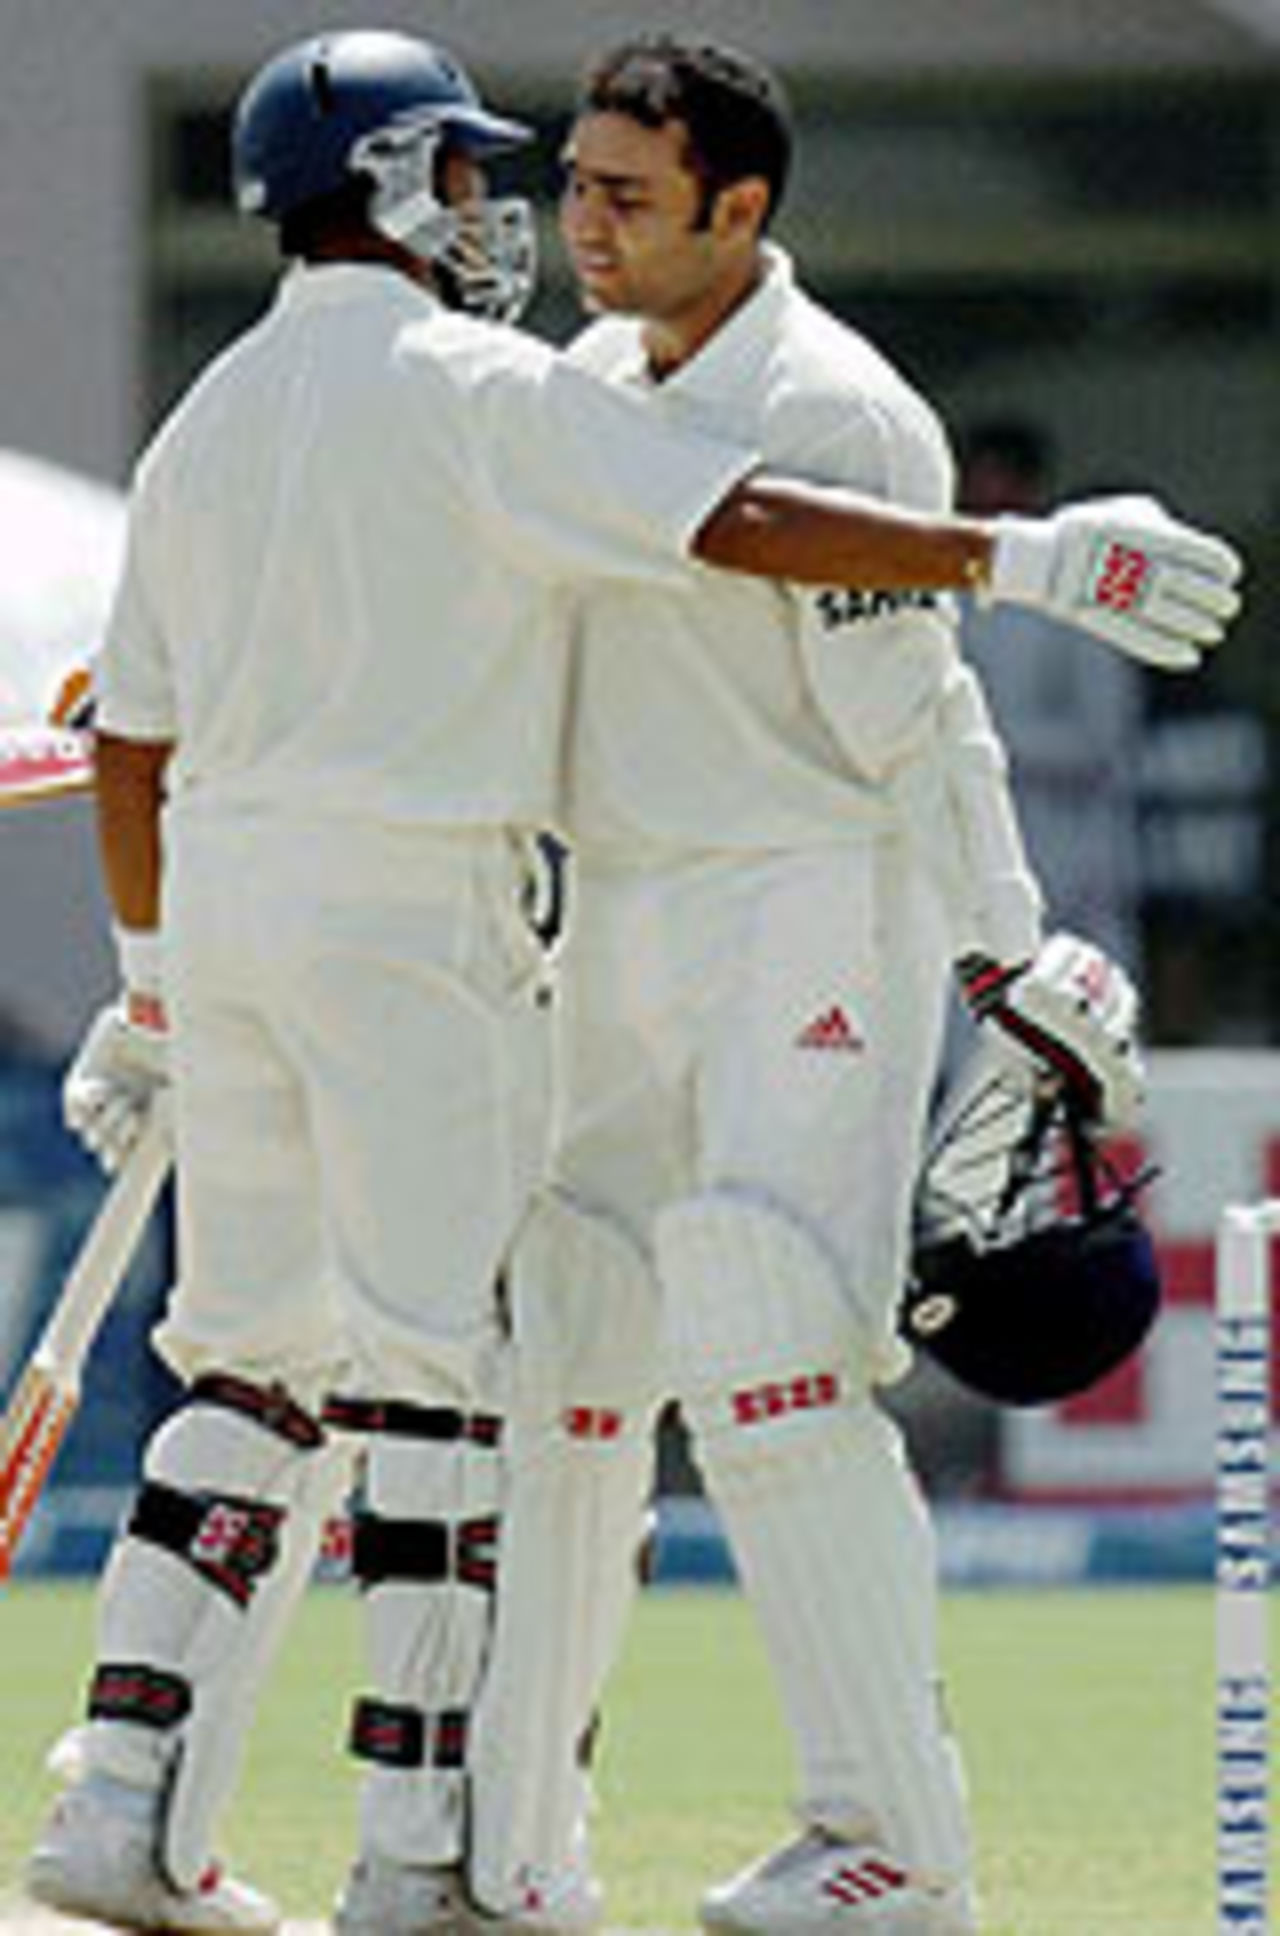 Virender Sehwag hugs Aakash Chopra after reaching his century, Pakistan v India, 1st Test, Multan, 1st day, March 28, 2004